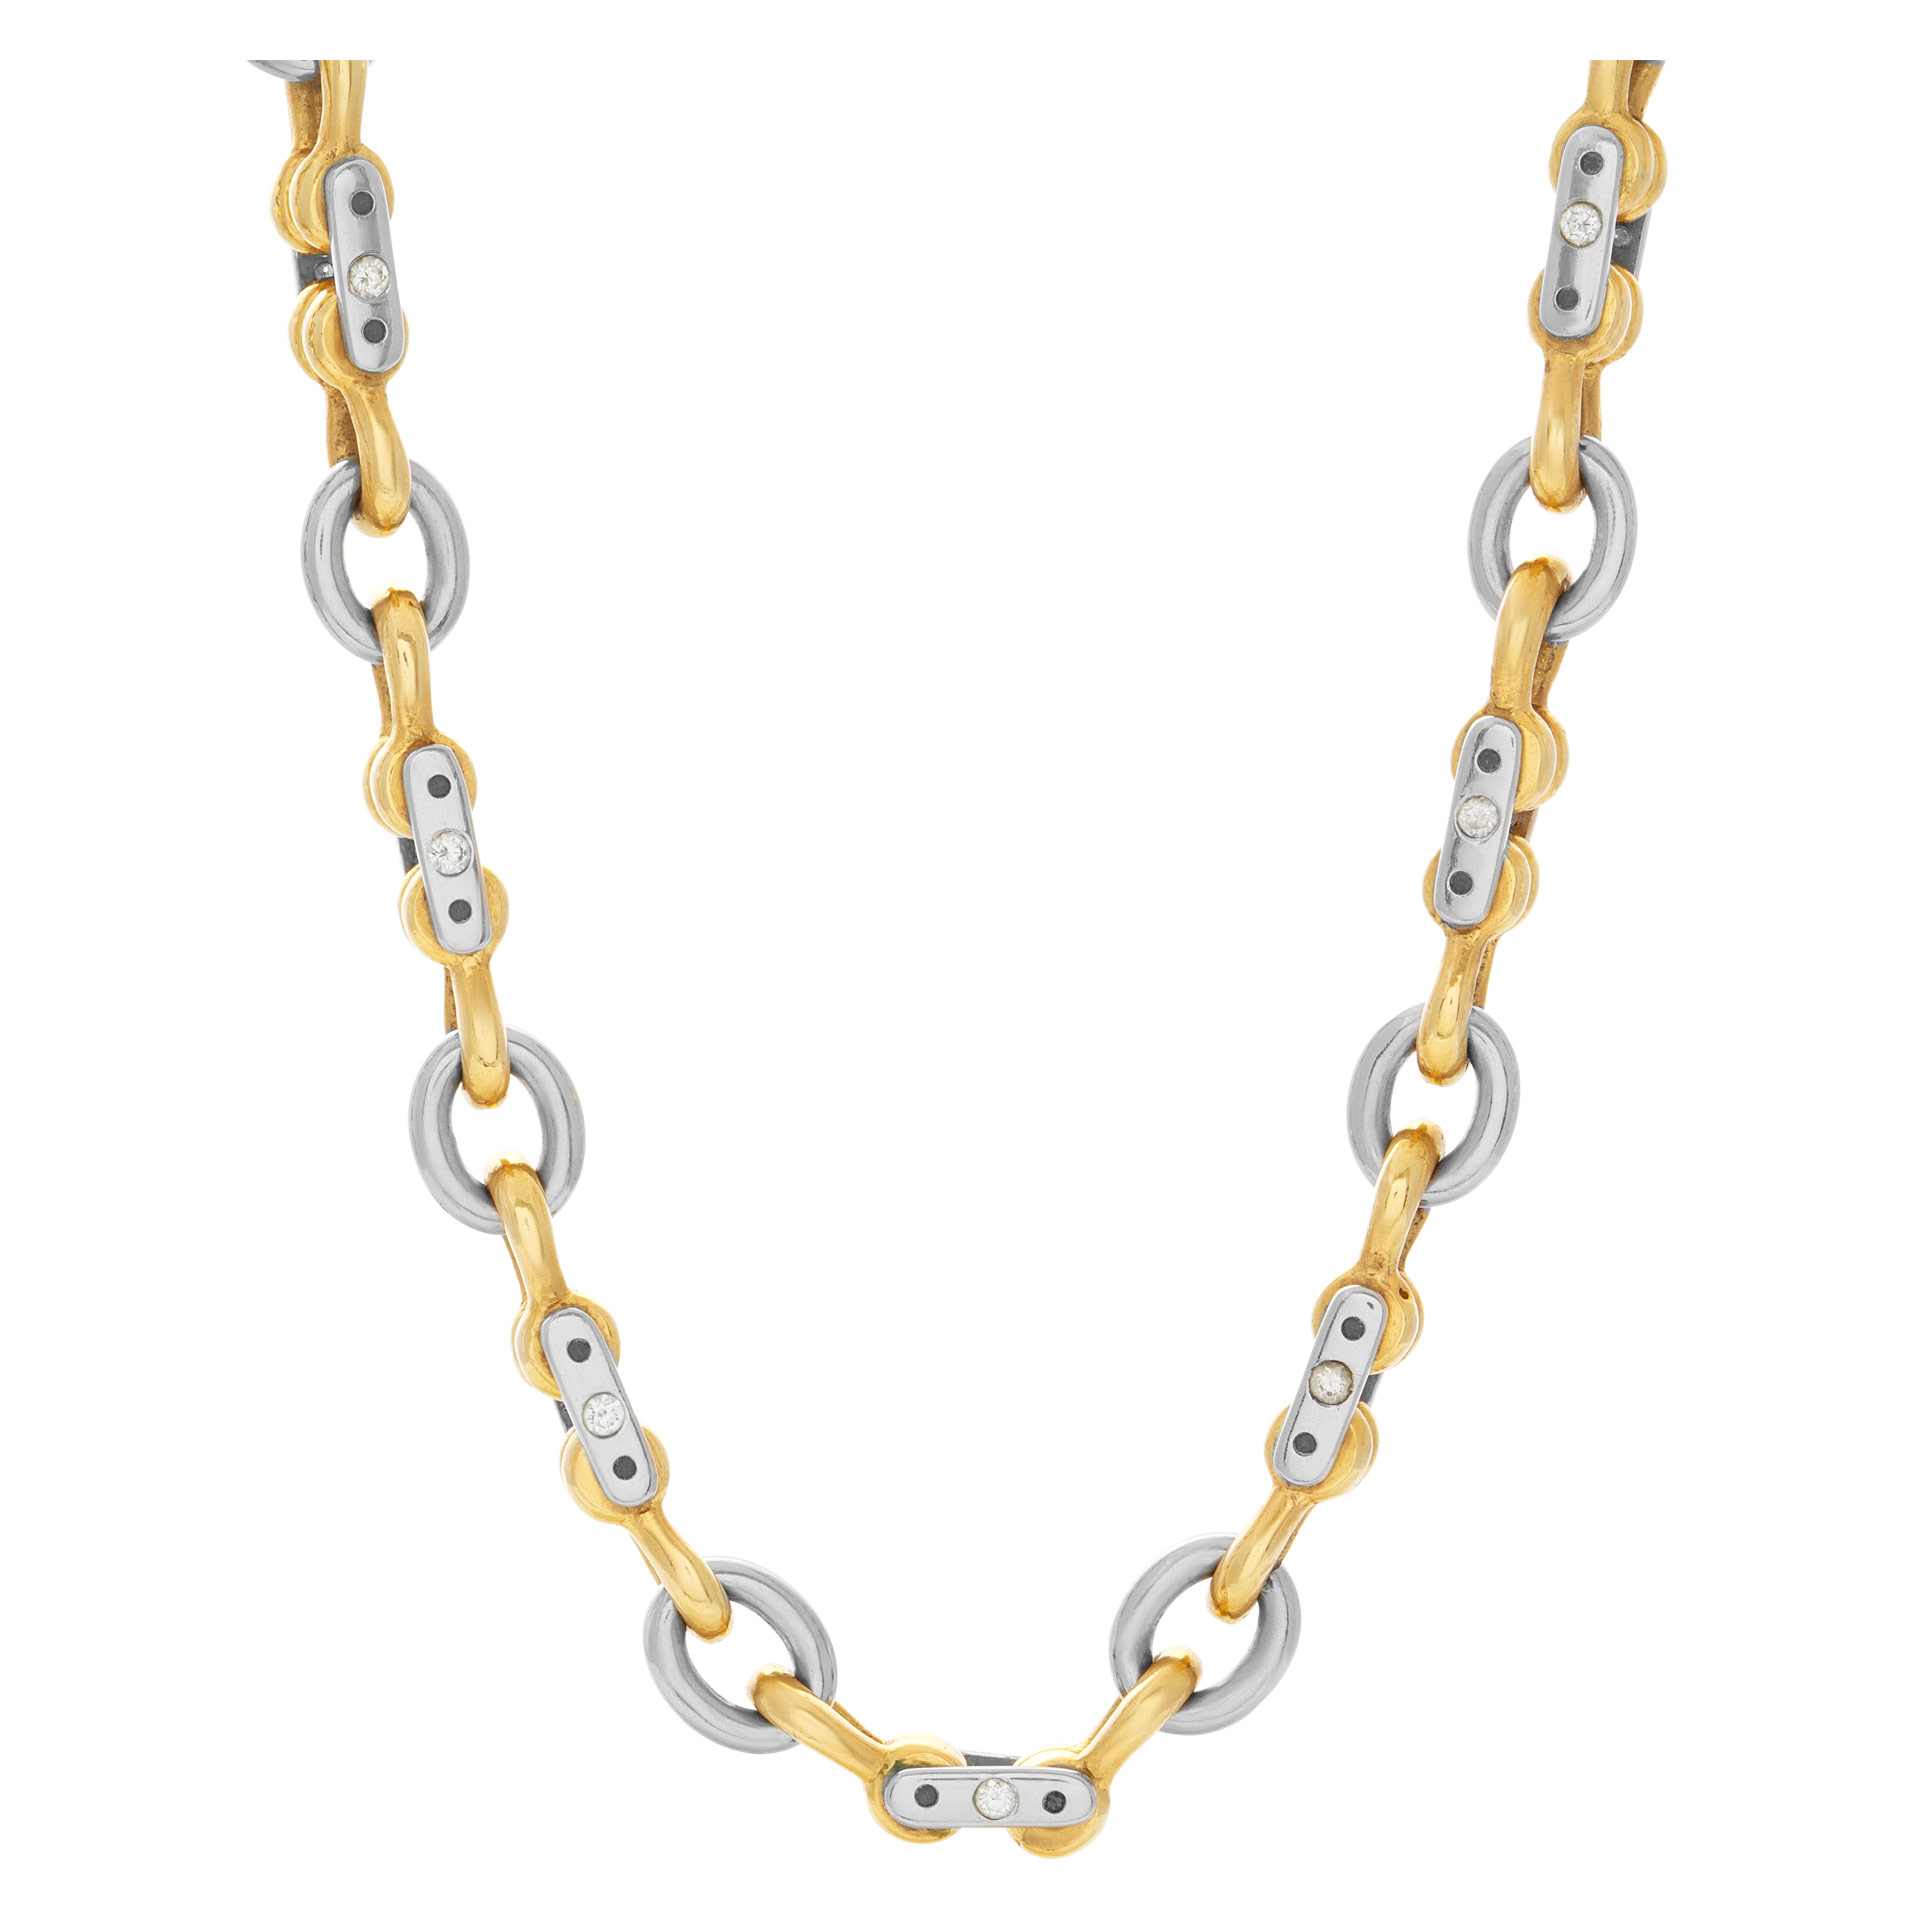 Mechanical link 18k white & yellow gold chain with diamond accents